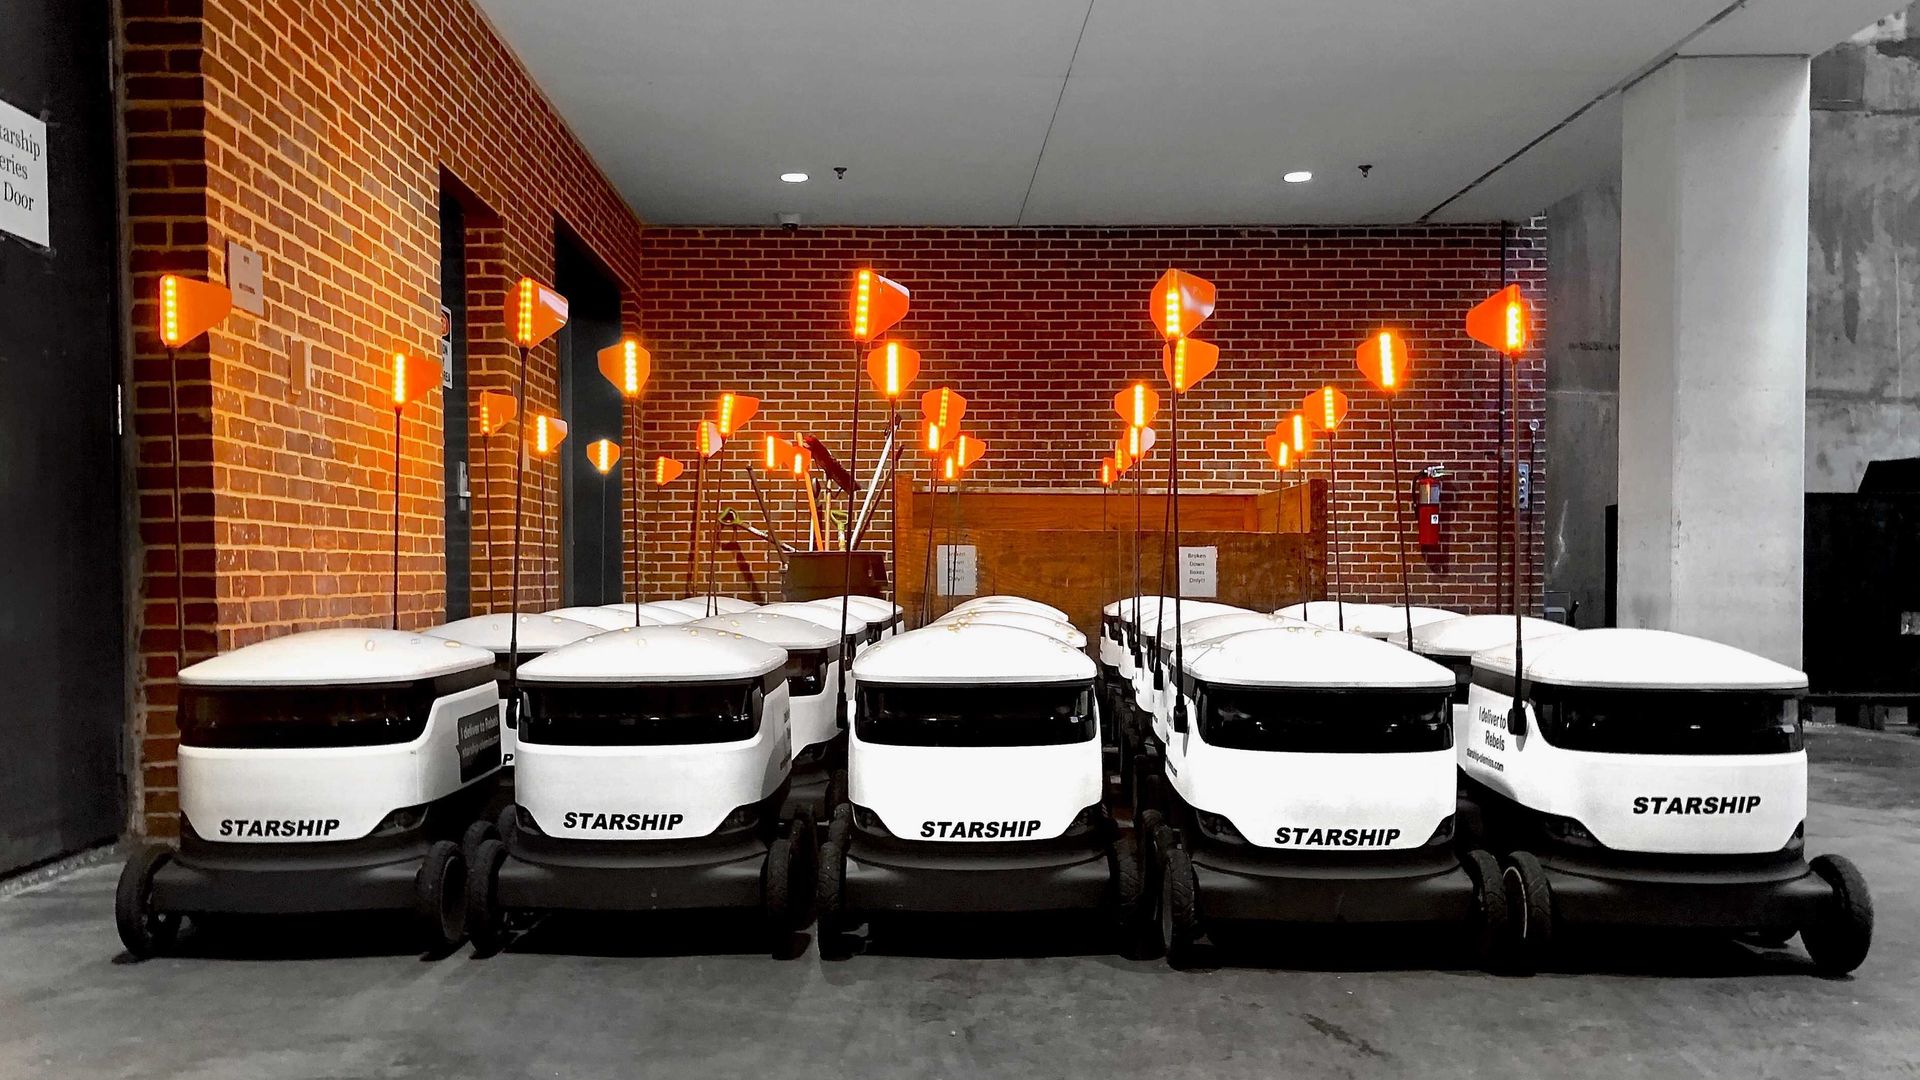 A fleet of delivery robots that bring food to college students at the S.M.U. campus